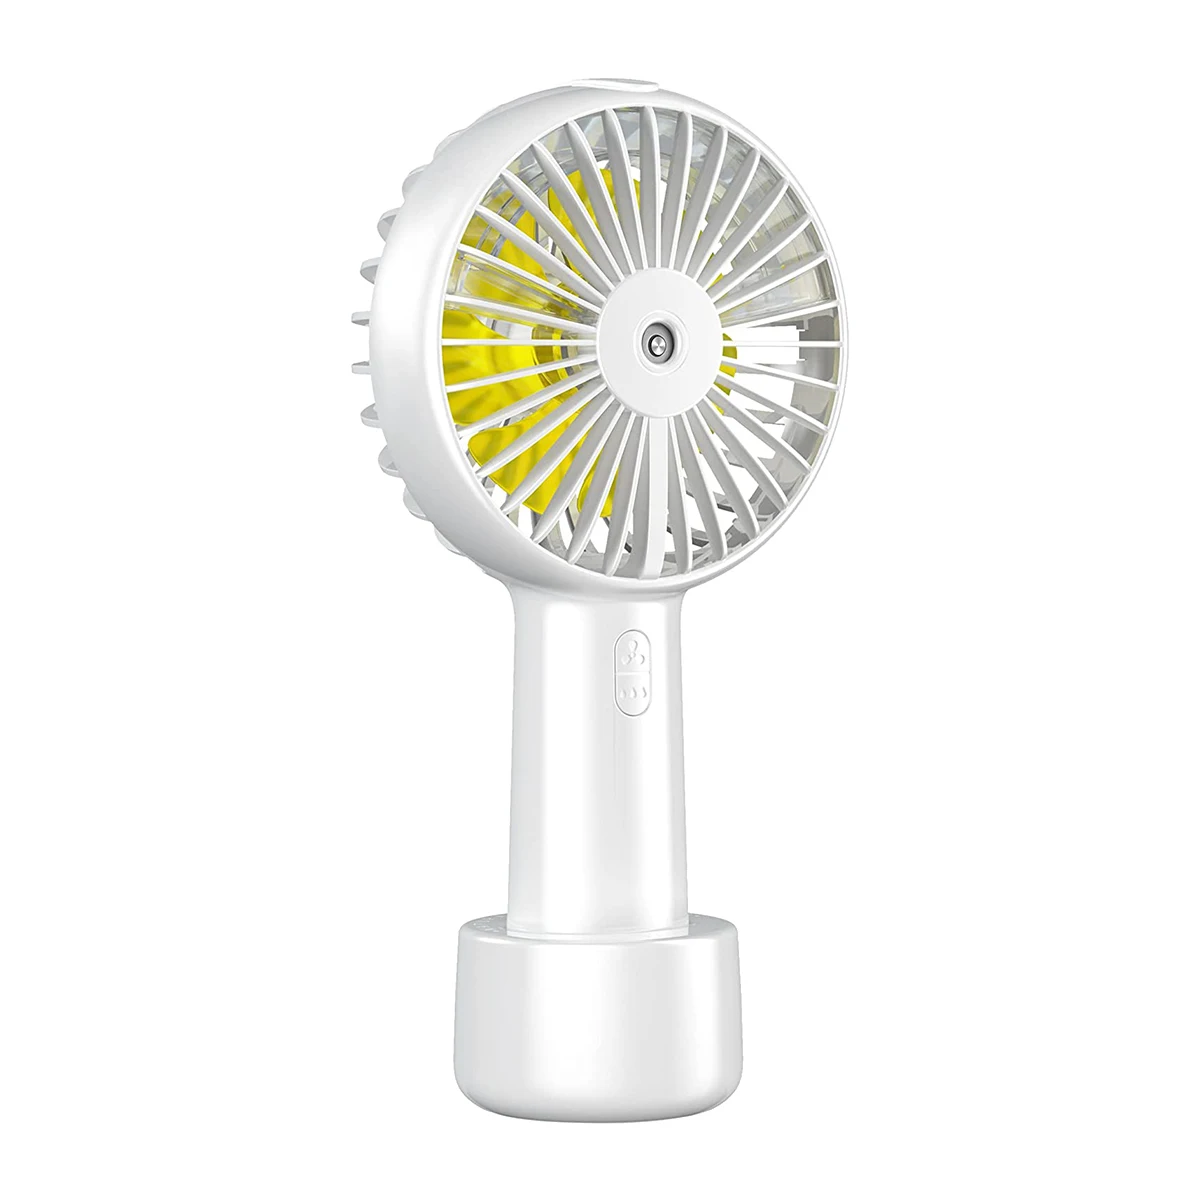 

Handheld Fan Misting, Hand Held Portable Fan with 3 Speeds and Battery Operated, 2 Mode Spray Mister Personal Fan(White)